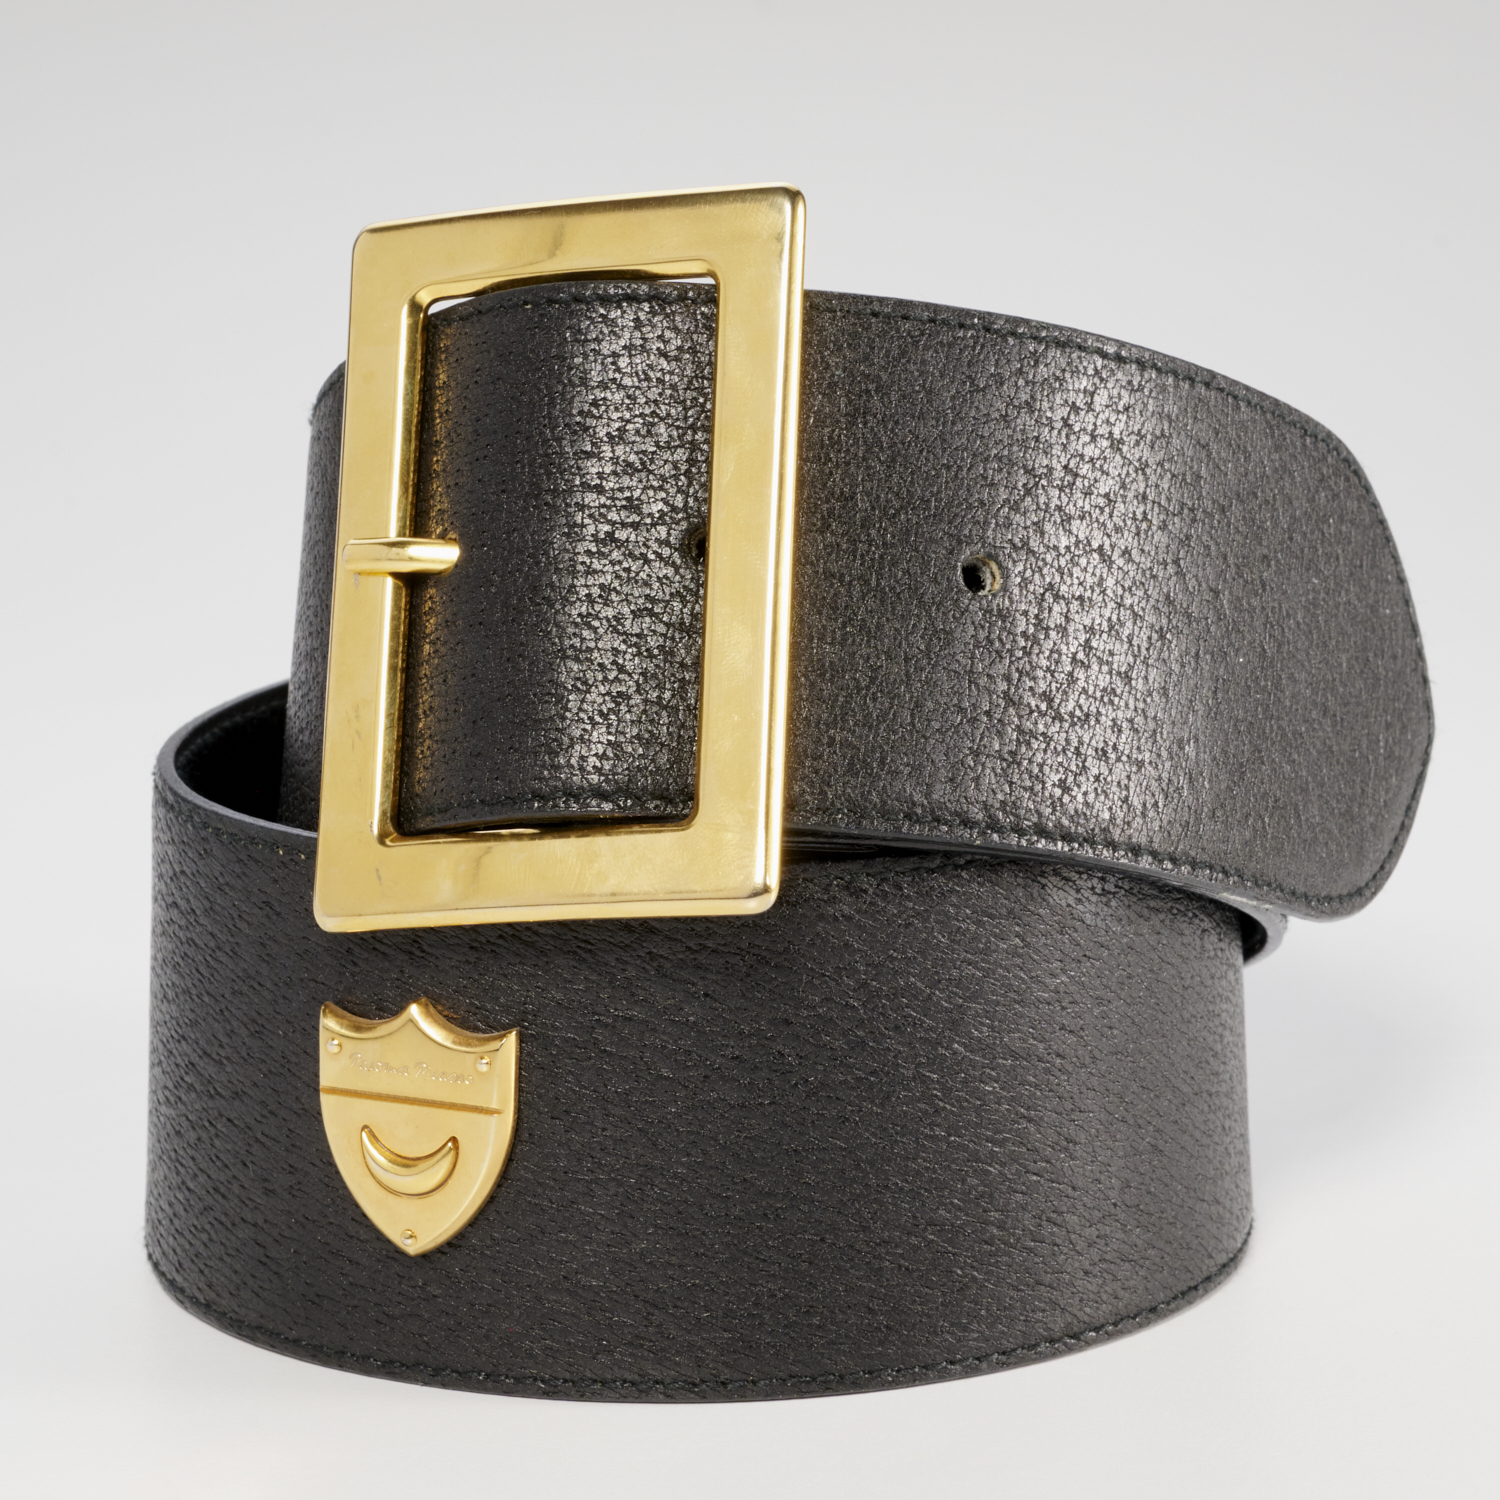 PALOMA PICASSO LEATHER SHIELD BELT 2fad40